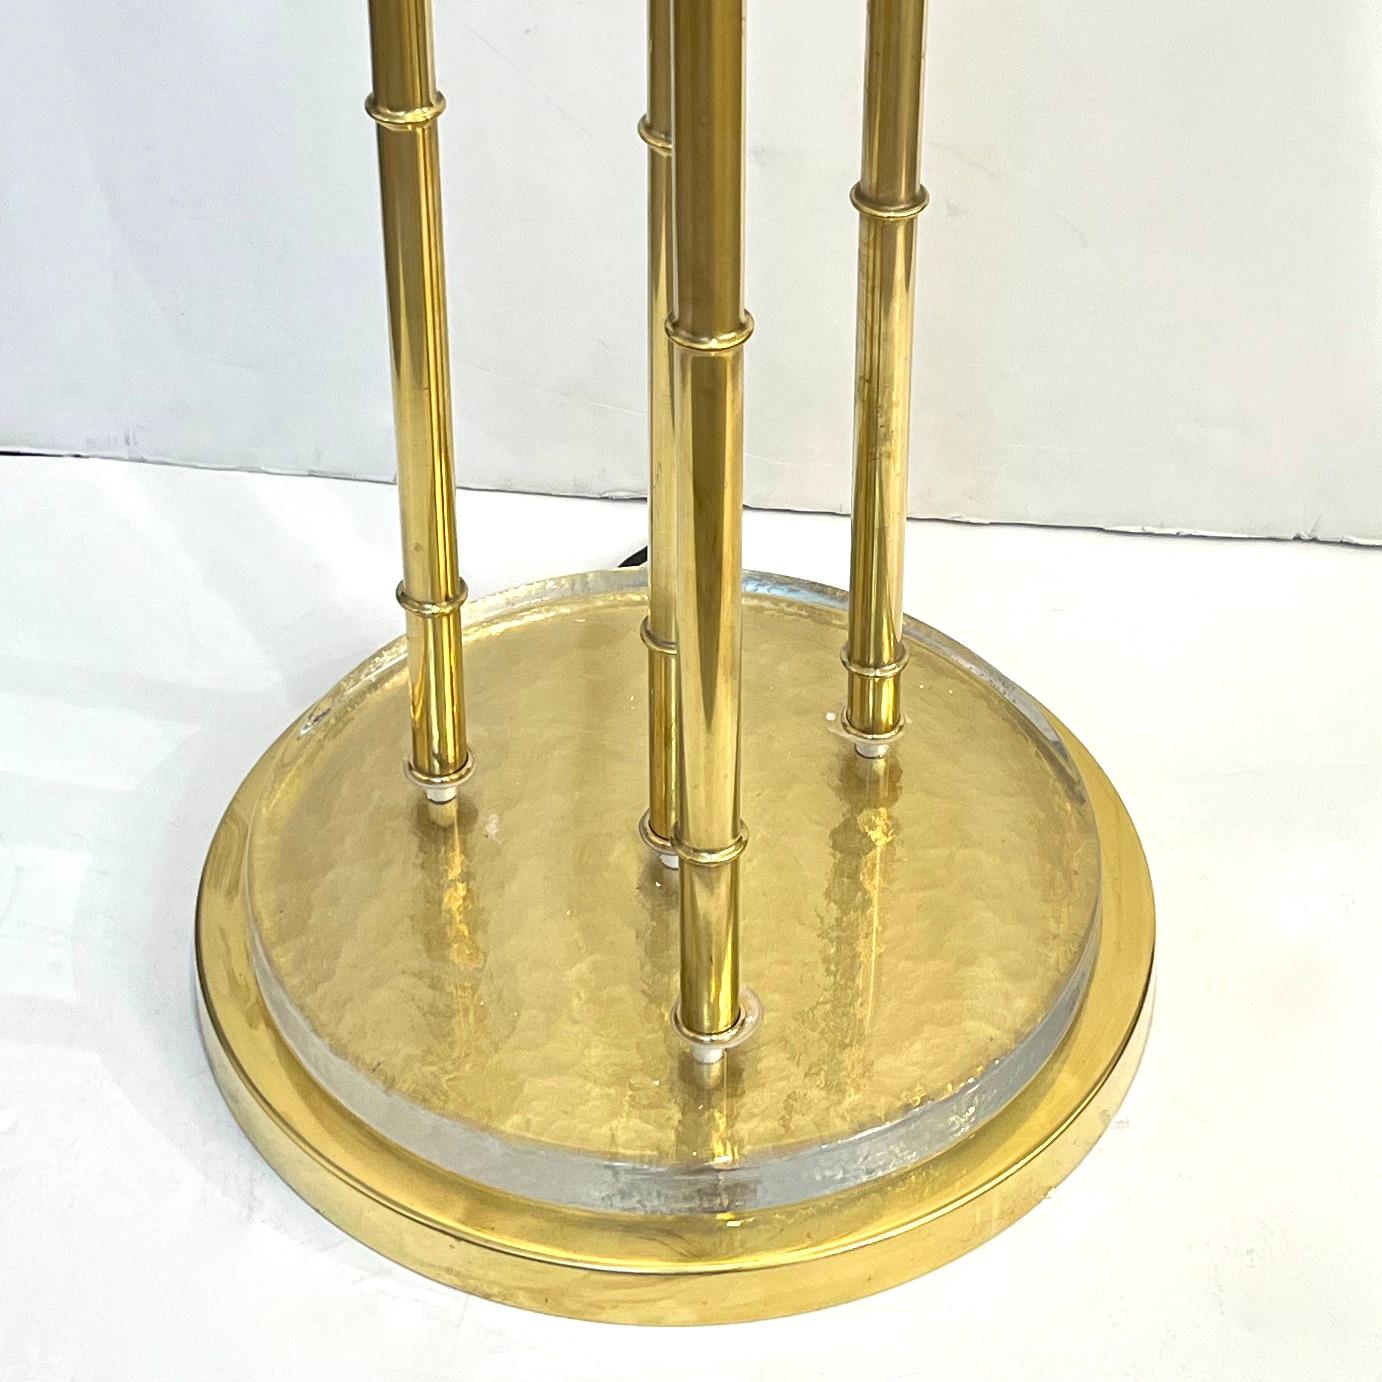 Contemporary Italian Art Deco Design Palm Tree Pair of 7-Leaf Brass Floor Lamps For Sale 9